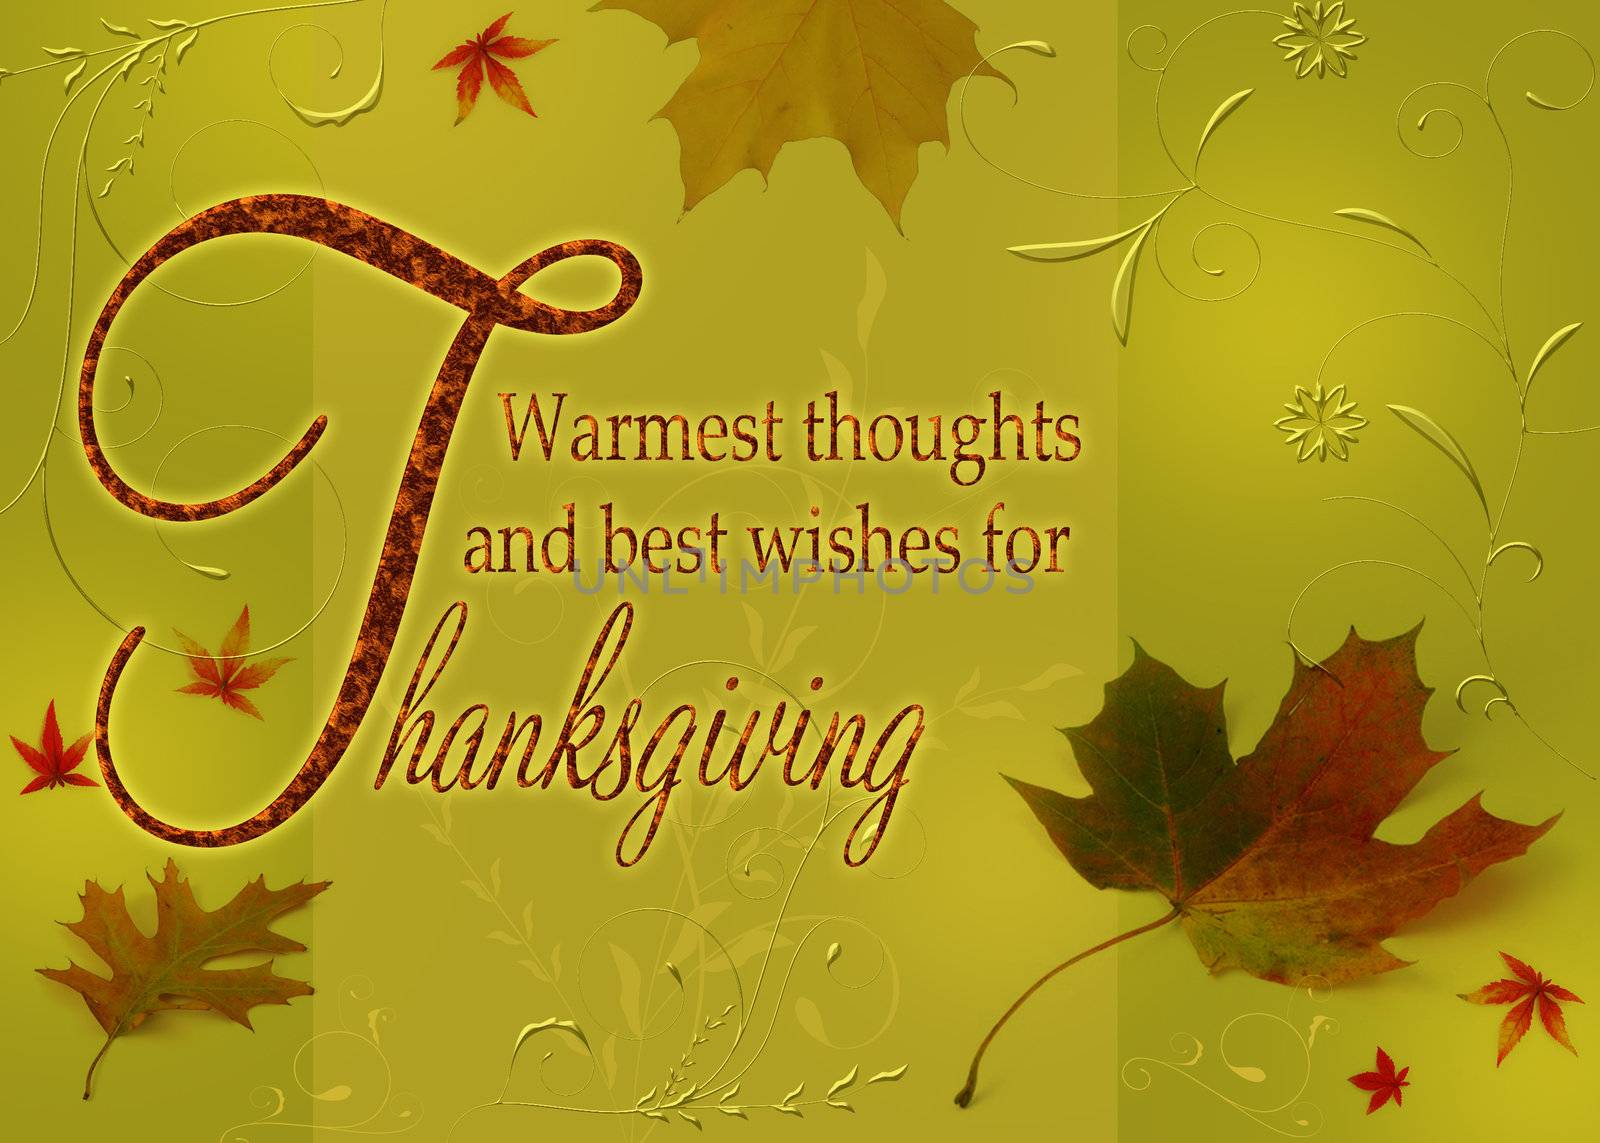 Thanksgiving Greetings, Thanksgiving wishes on an autumn illustration with leaves and floral ornaments on a green background.